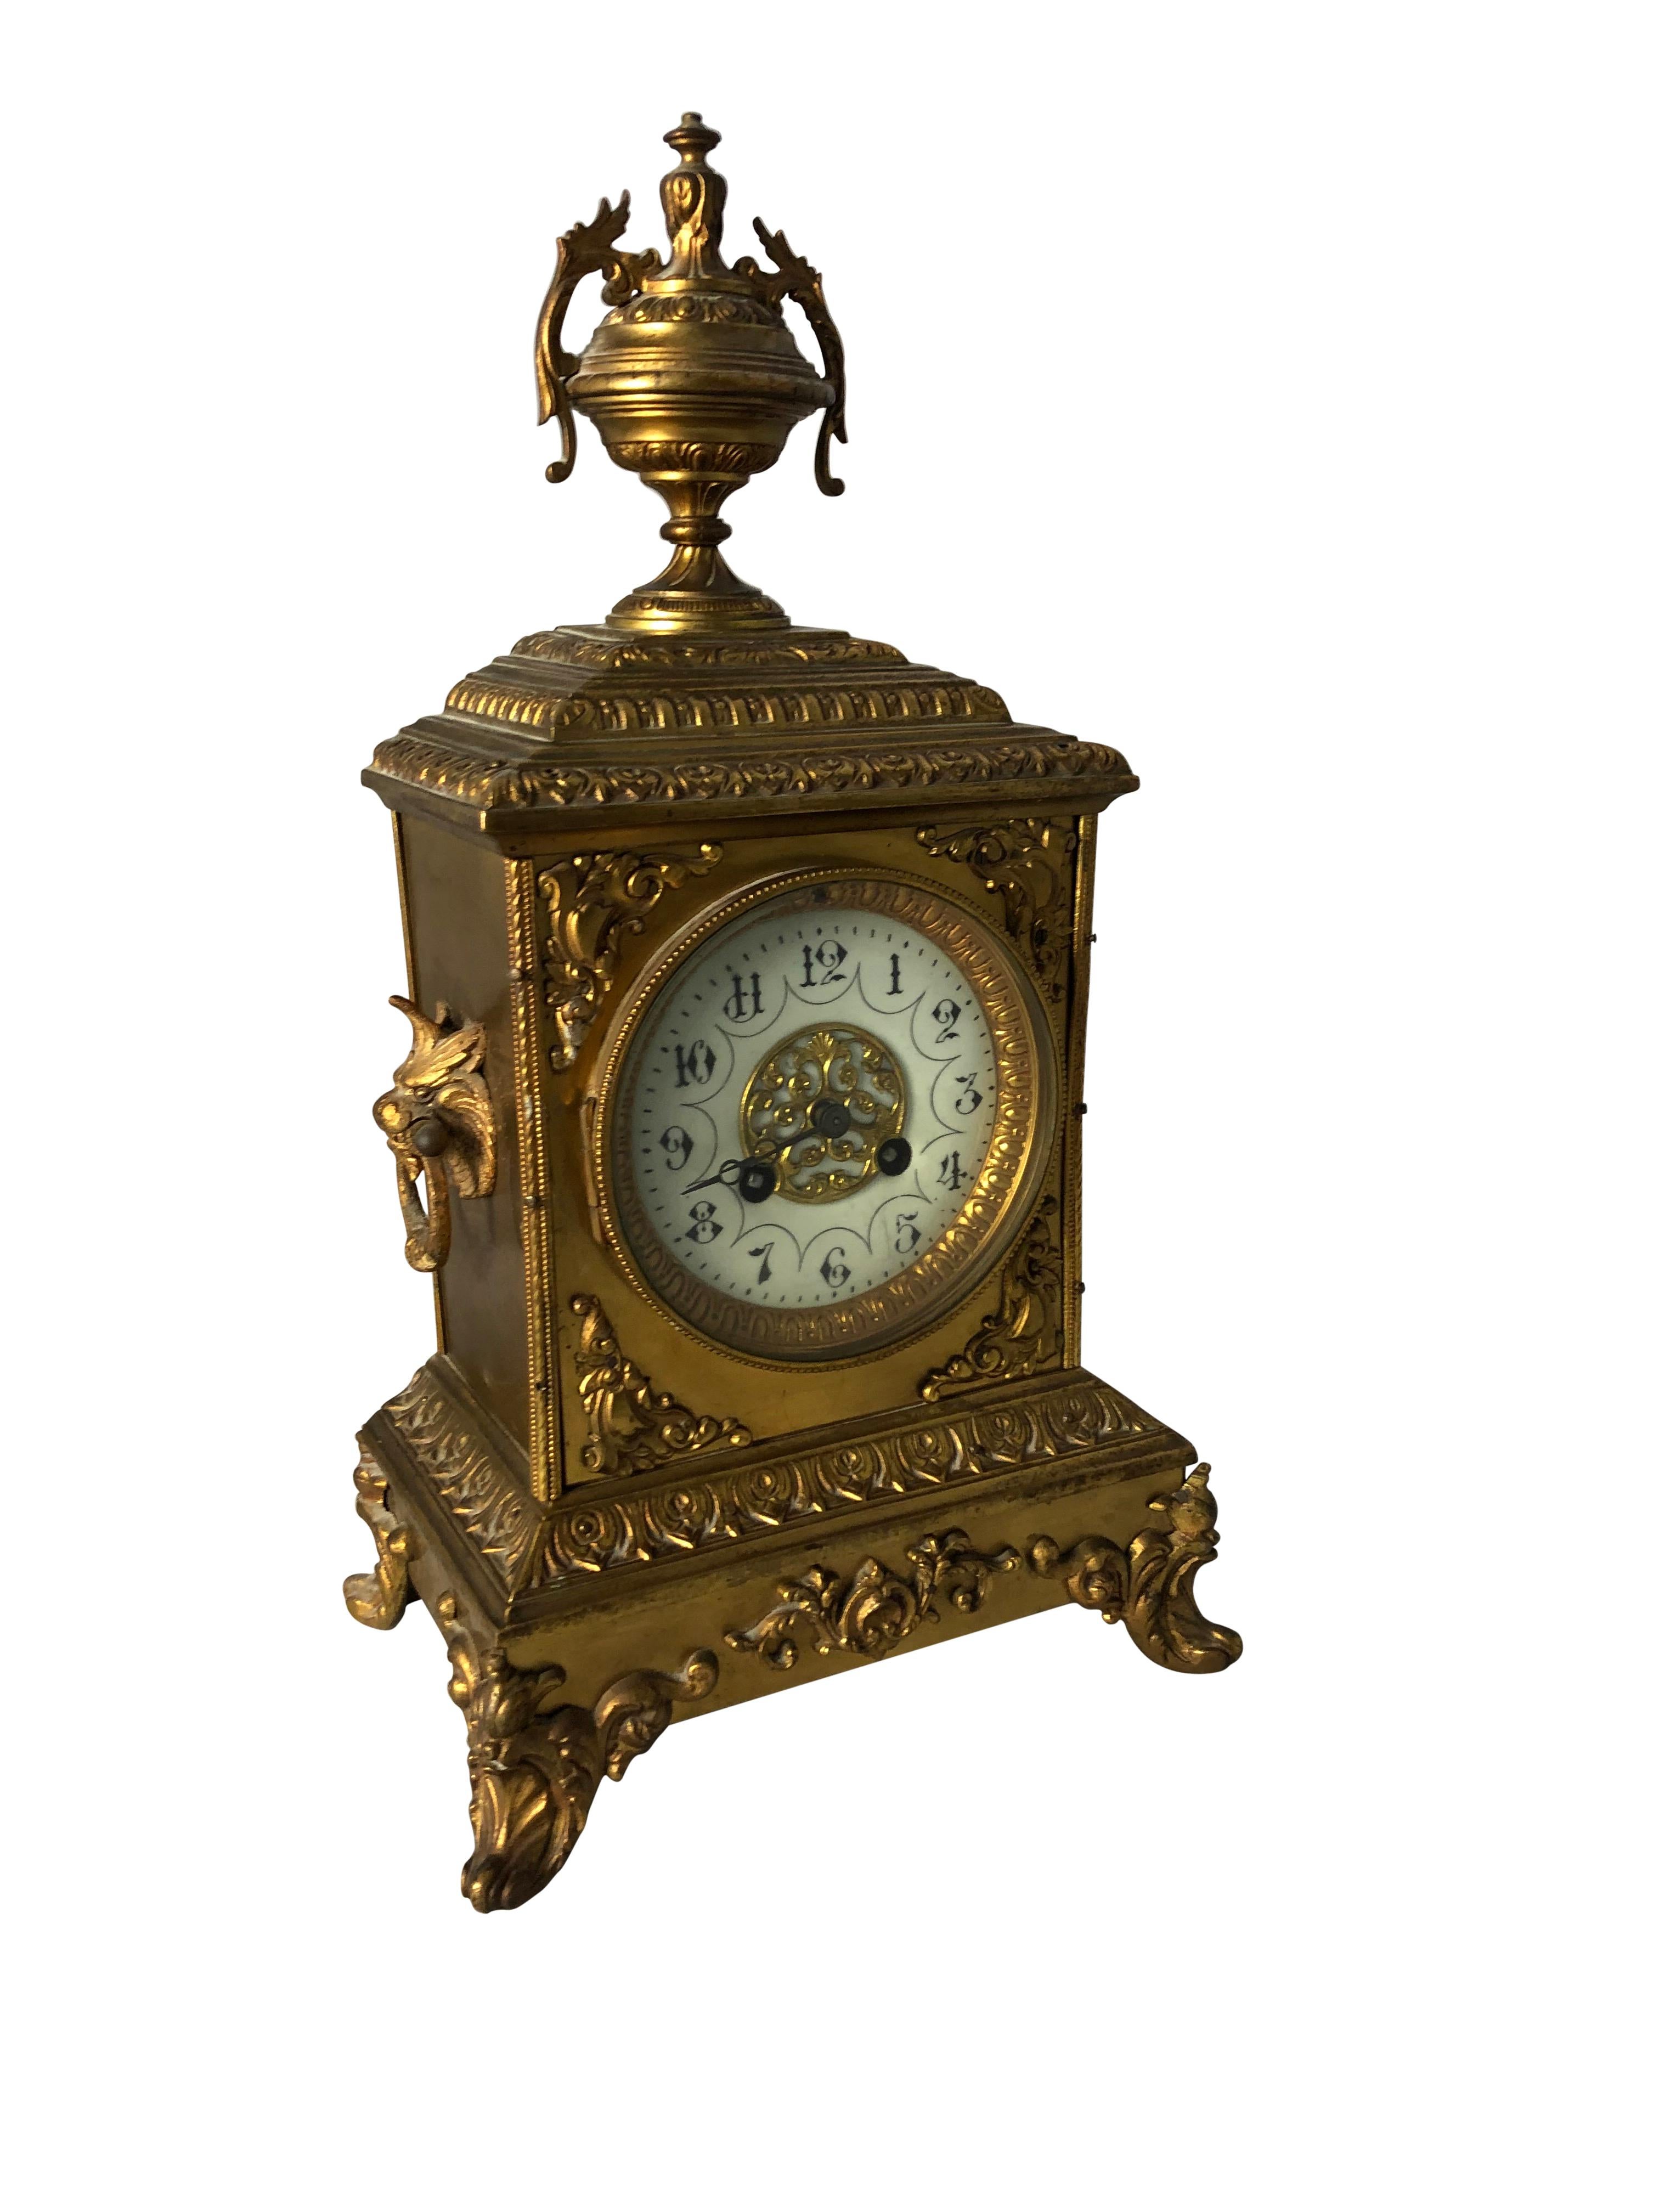 A fine quality French Ormolu mantel clock, 19th century, in Sevres Manner. The ornate case with finely cast detailed mouldings and cornice, surmounted by a floral decorated urn, the front set with porcelain plaque, raised on floral feet, the dial